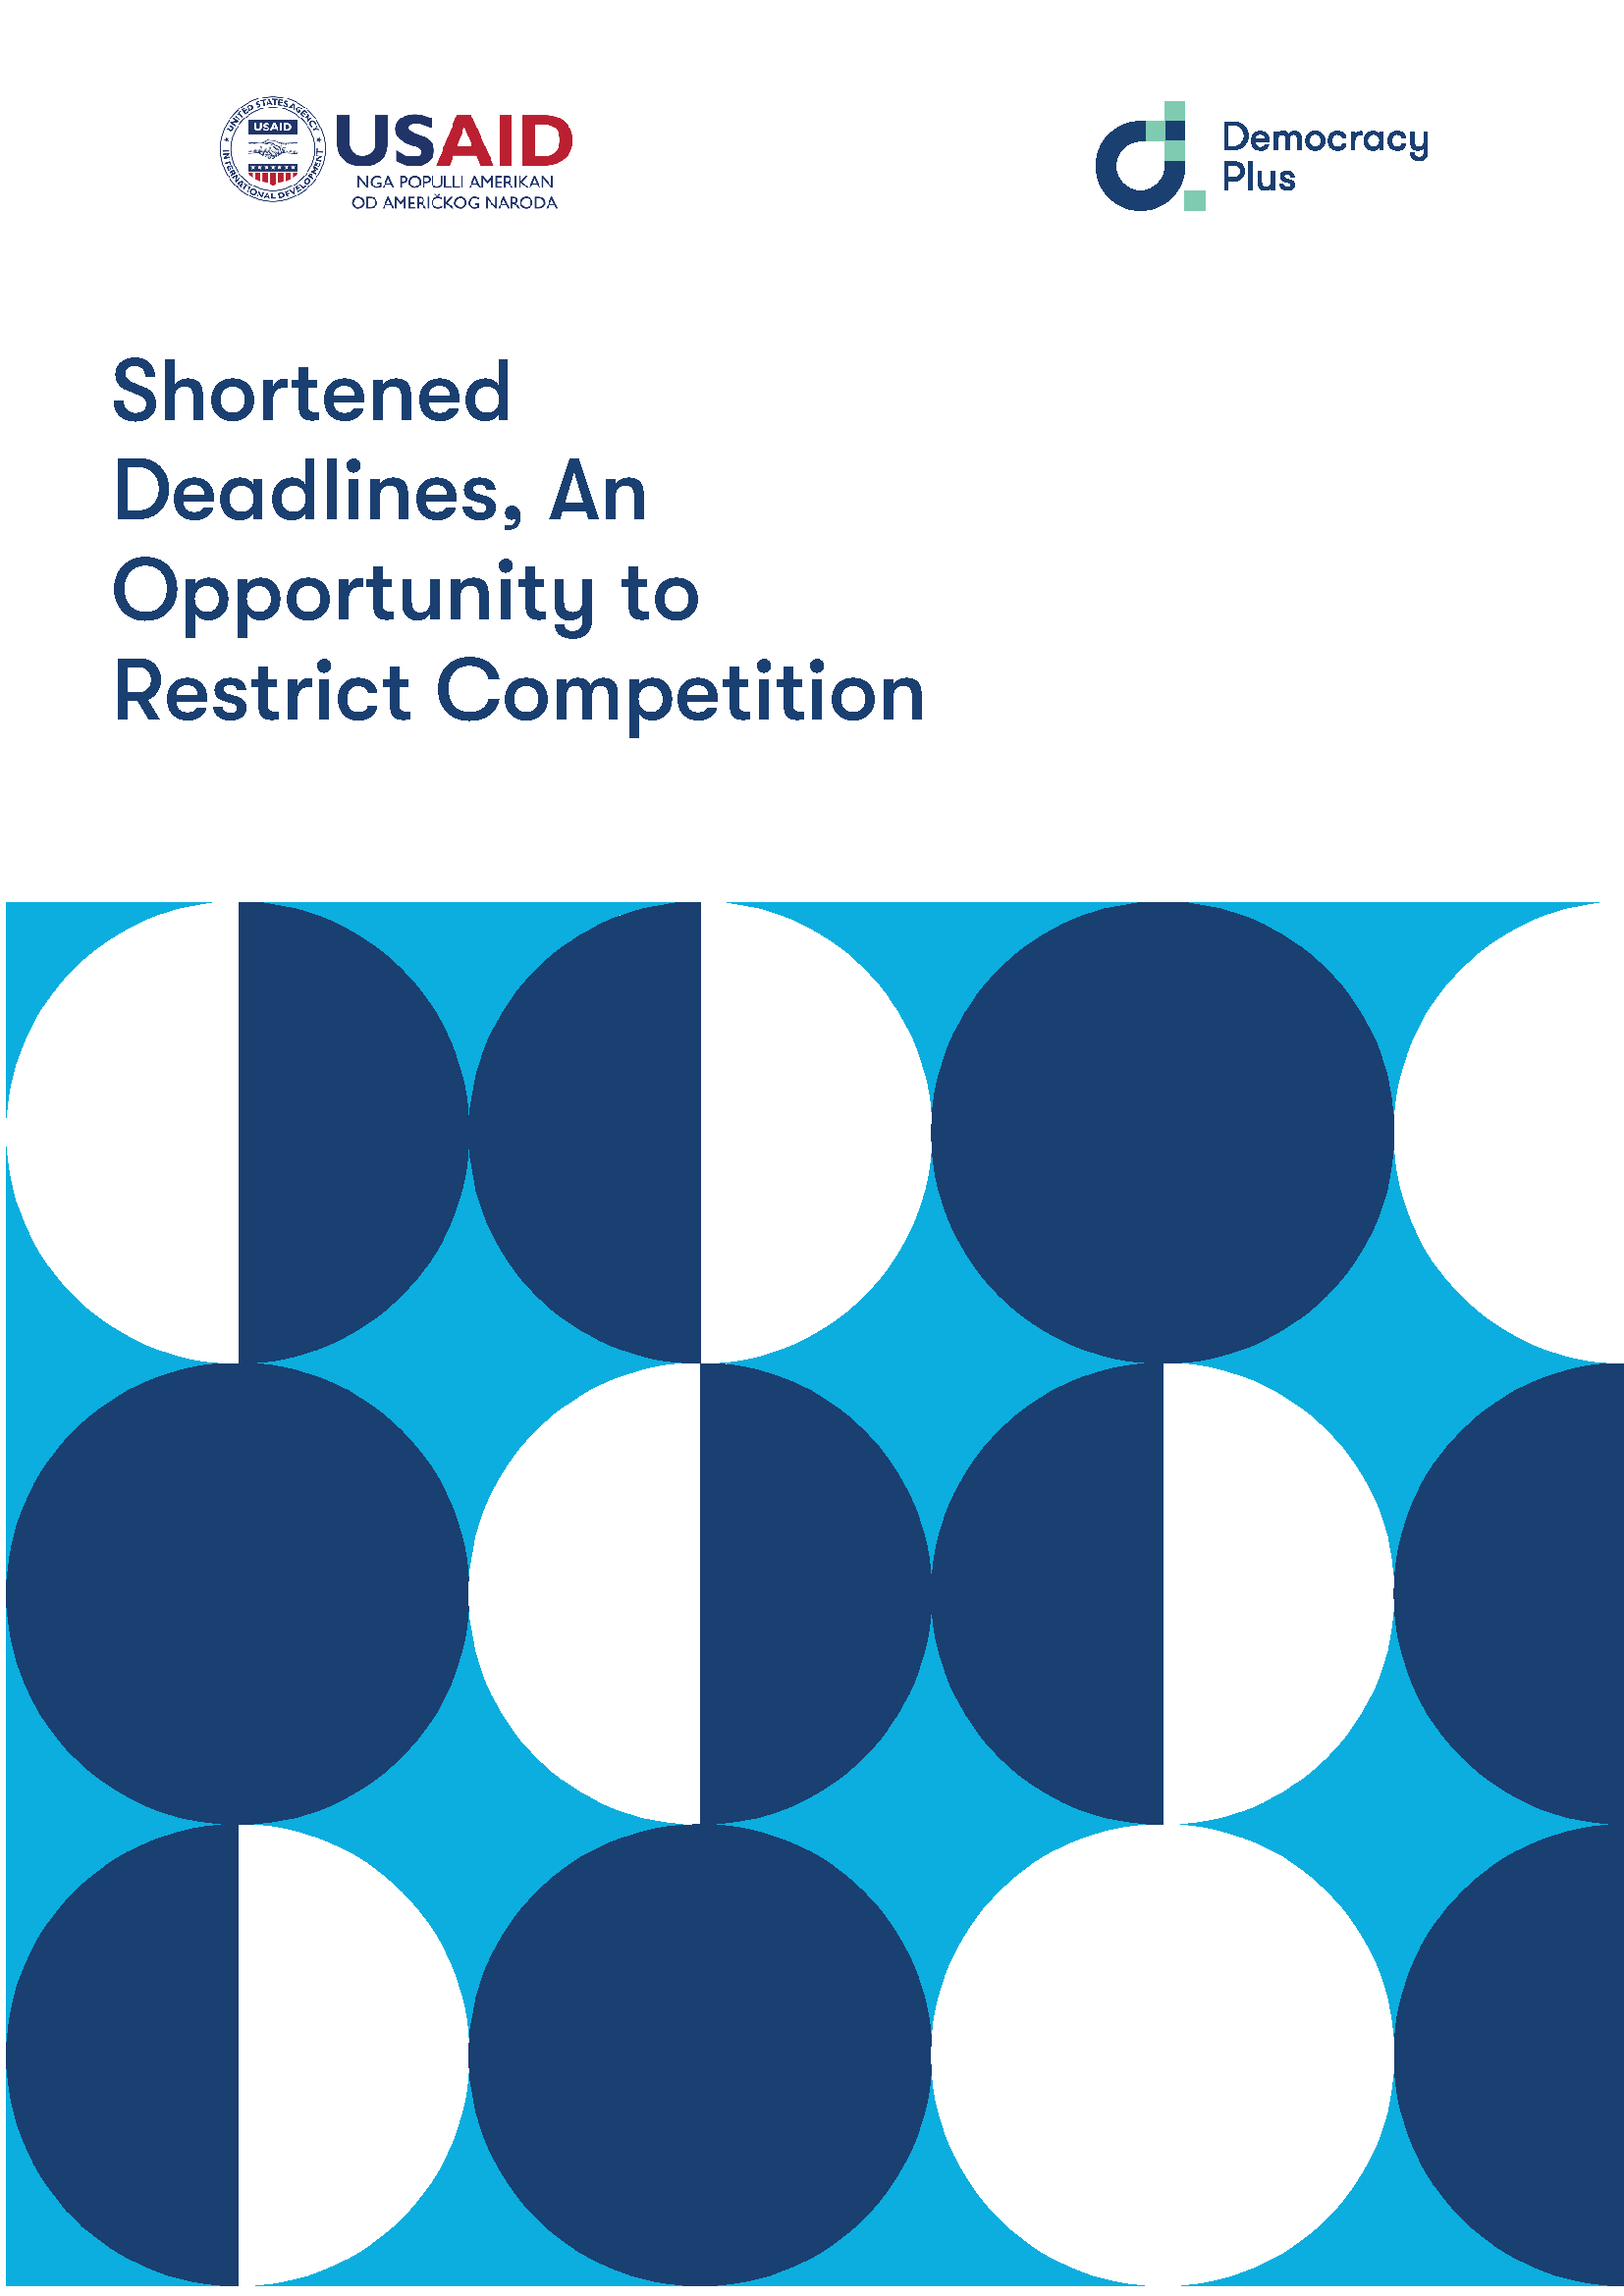 Shortened Deadlines, An Opportunity to Restrict Competition